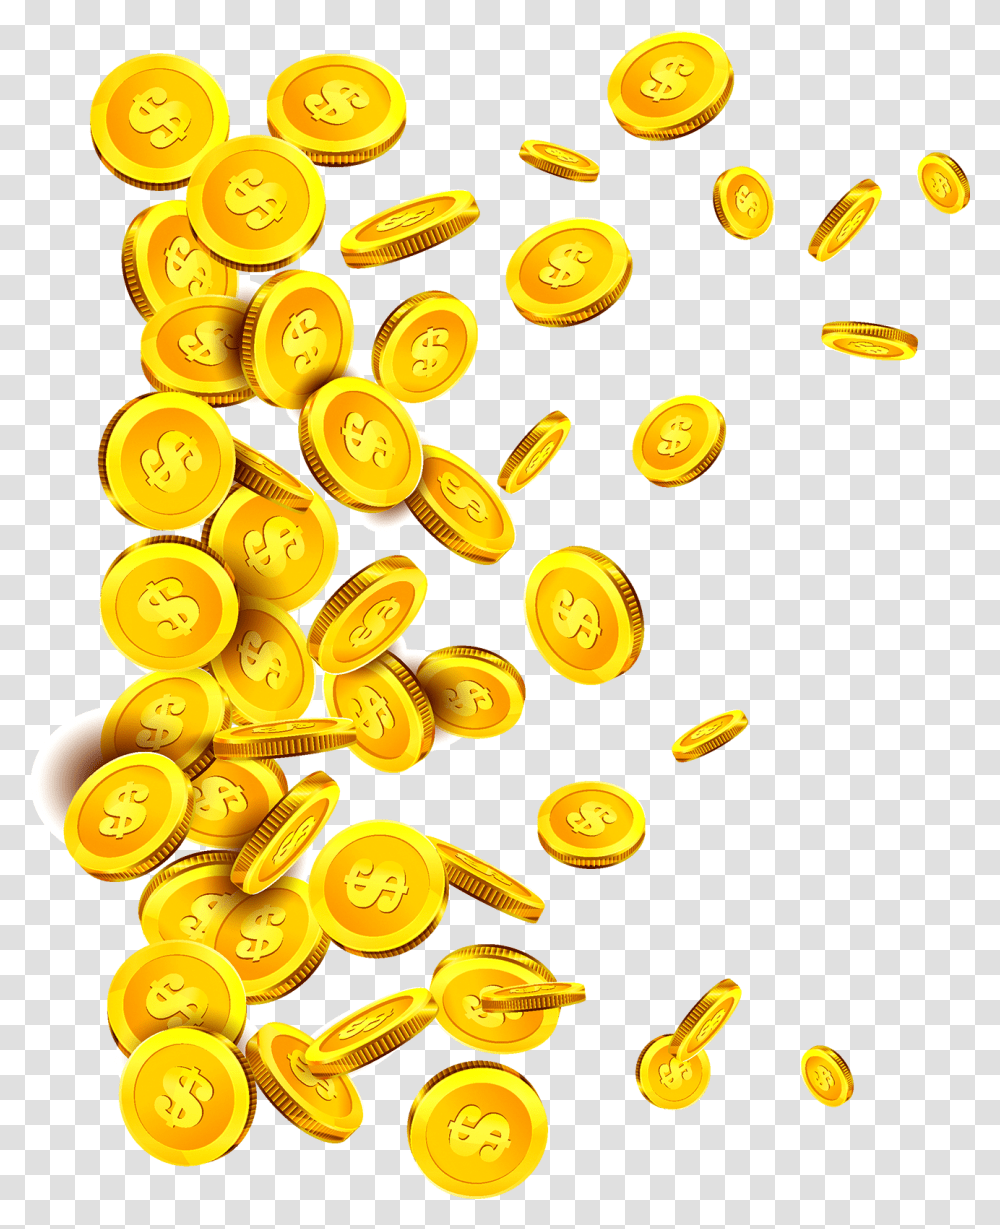 Gold Coin Money Floating Coins Download 13001618 Gold Coin, Food, Bubble, Graphics, Art Transparent Png